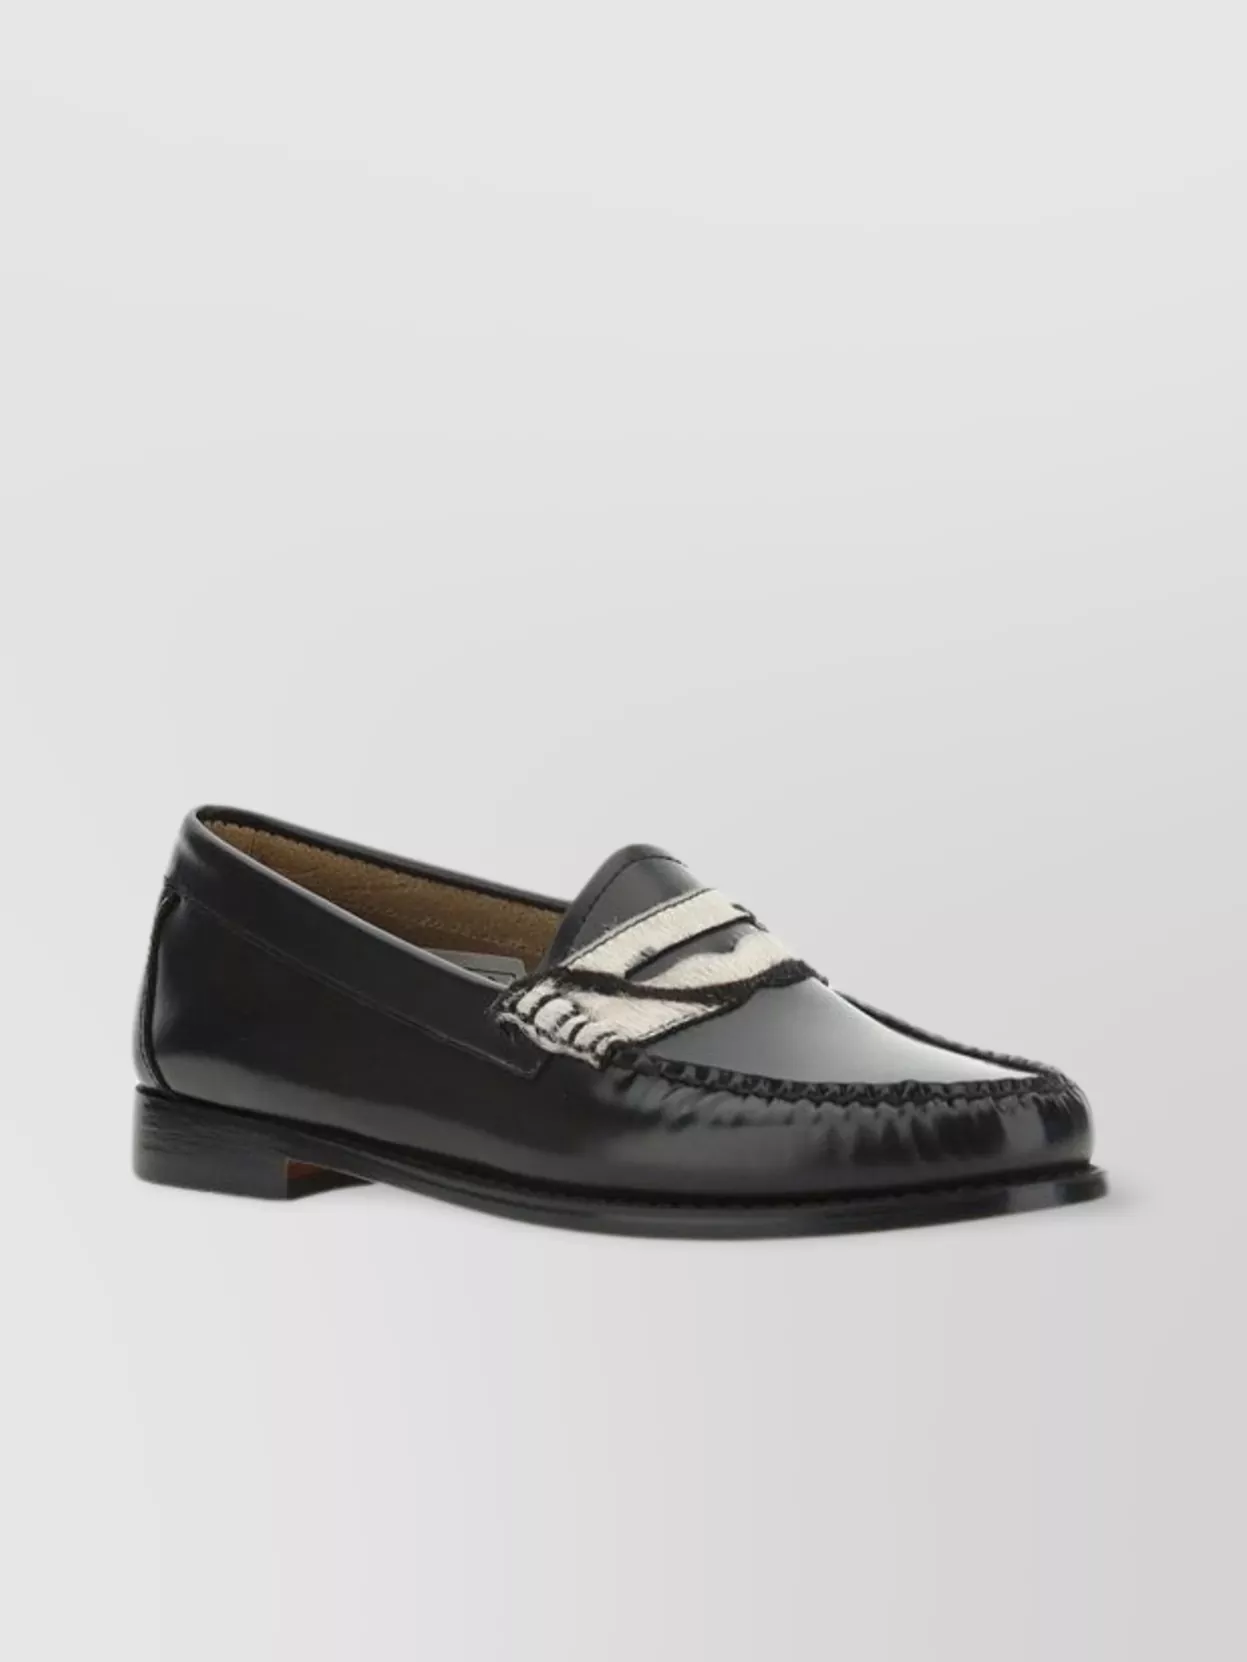 Shop Gh Bass Women's Exotic Penny Loafers